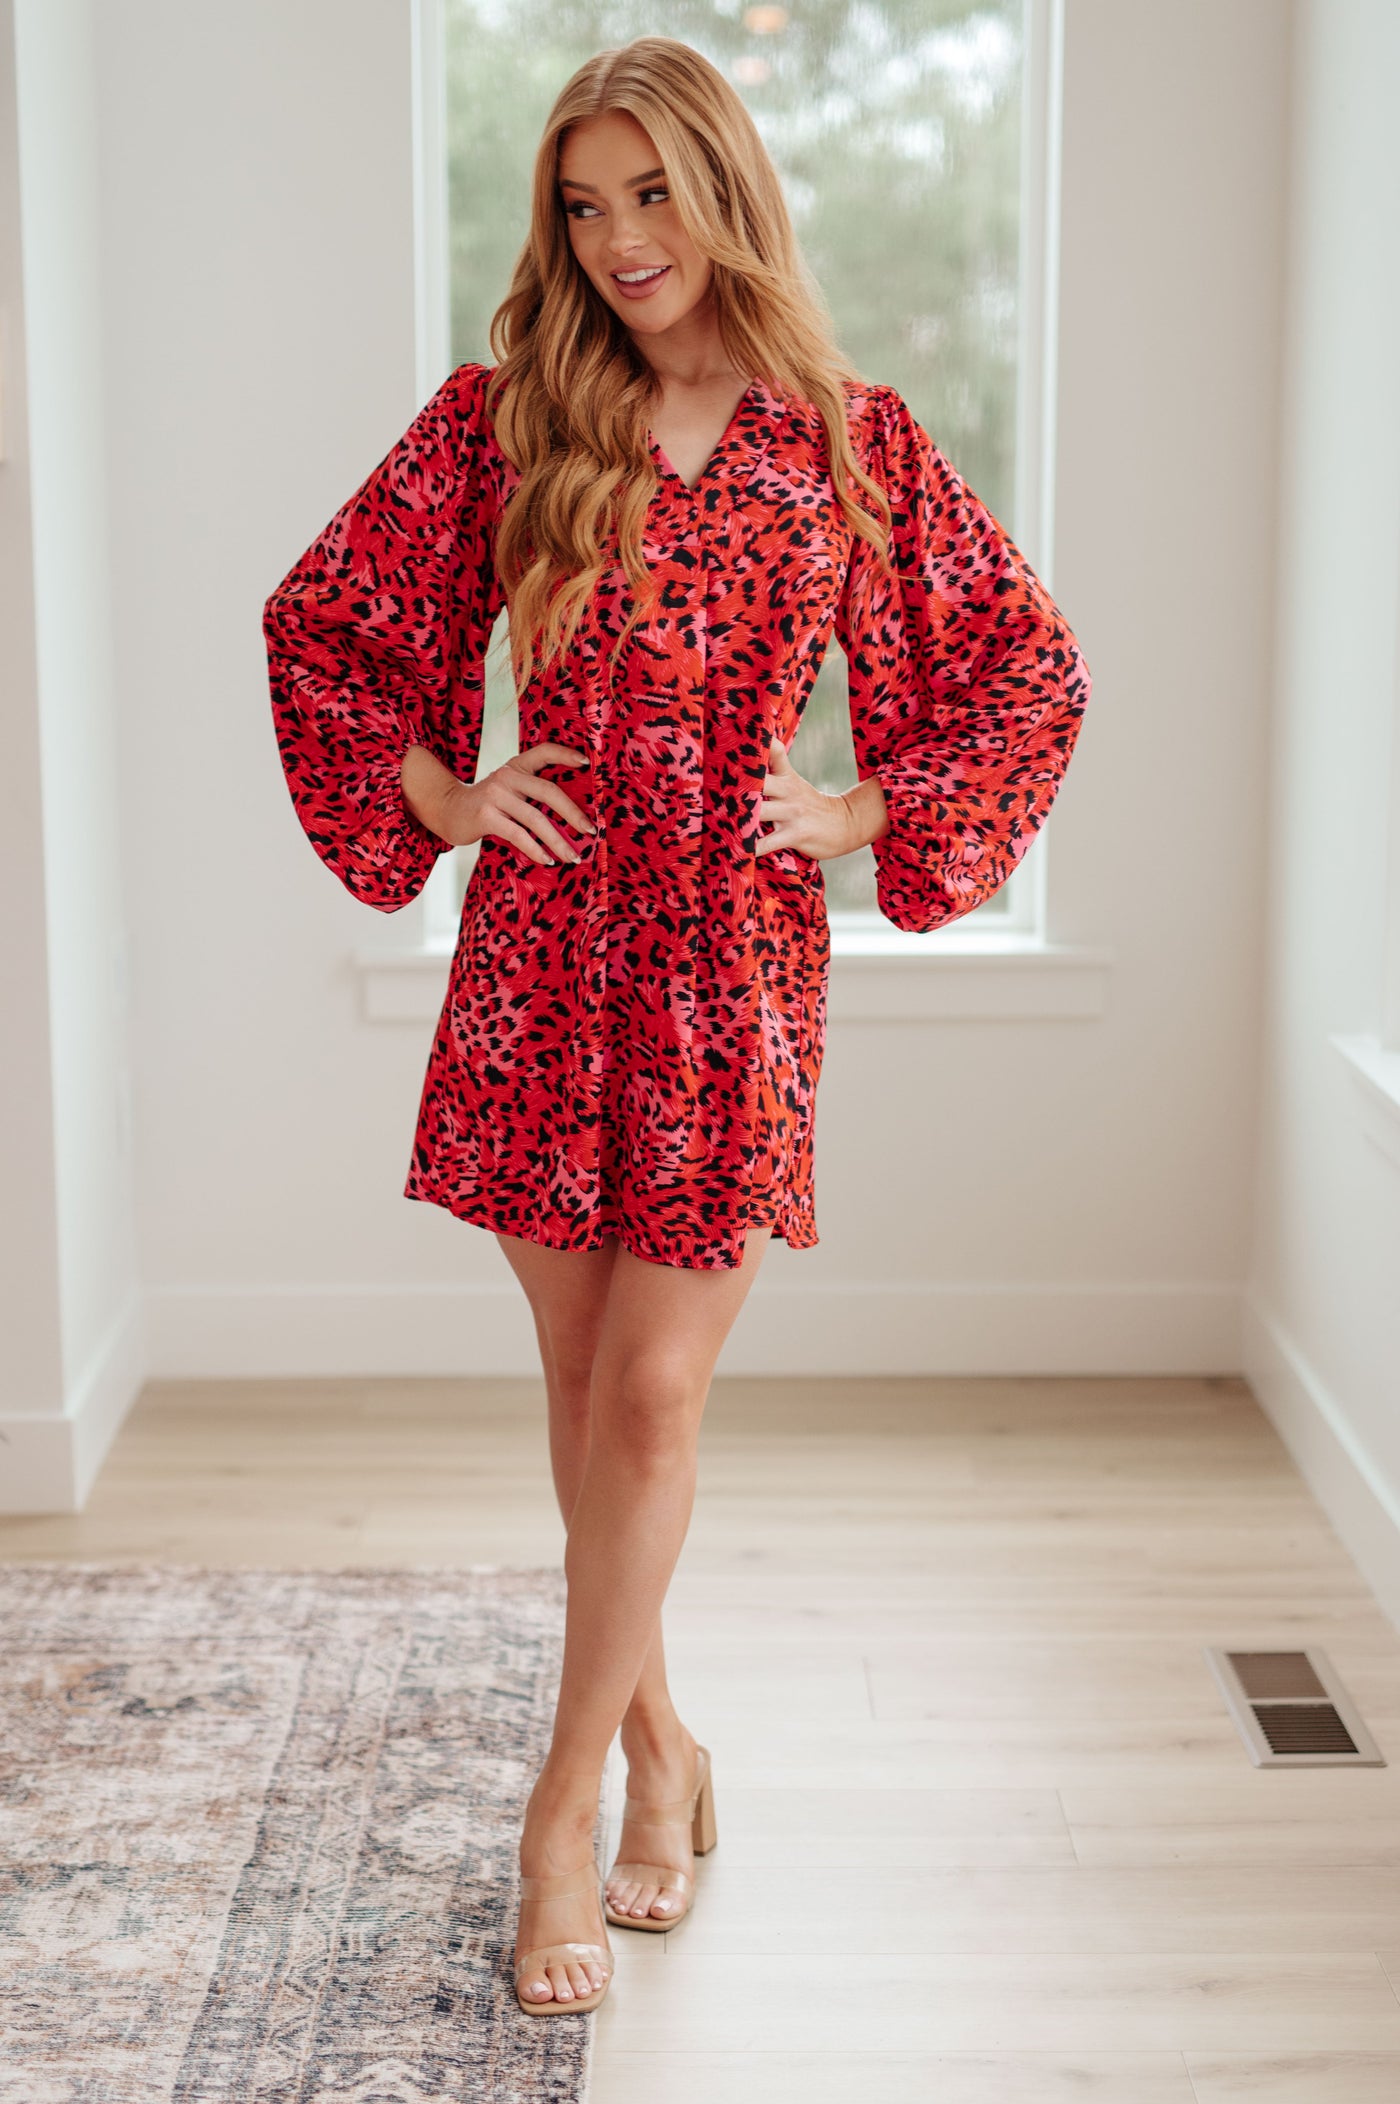 Featuring a vibrant color, all-over animal print, v-neckline, and voluminous balloon sleeves, this dress is sure to help you stand out. Live life on the wild side!